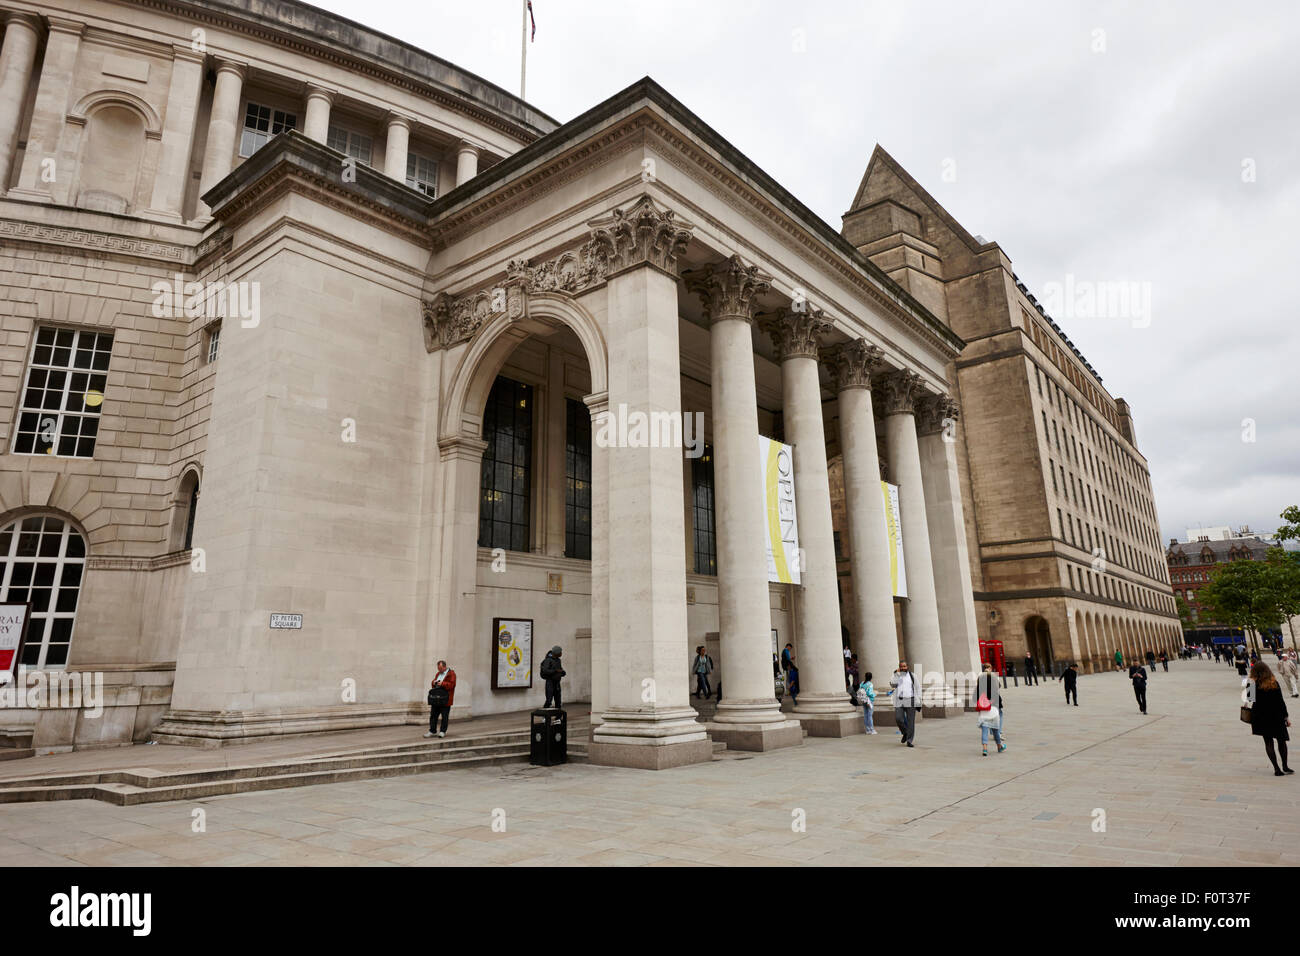 st peters square Manchester central library England UK Stock Photo